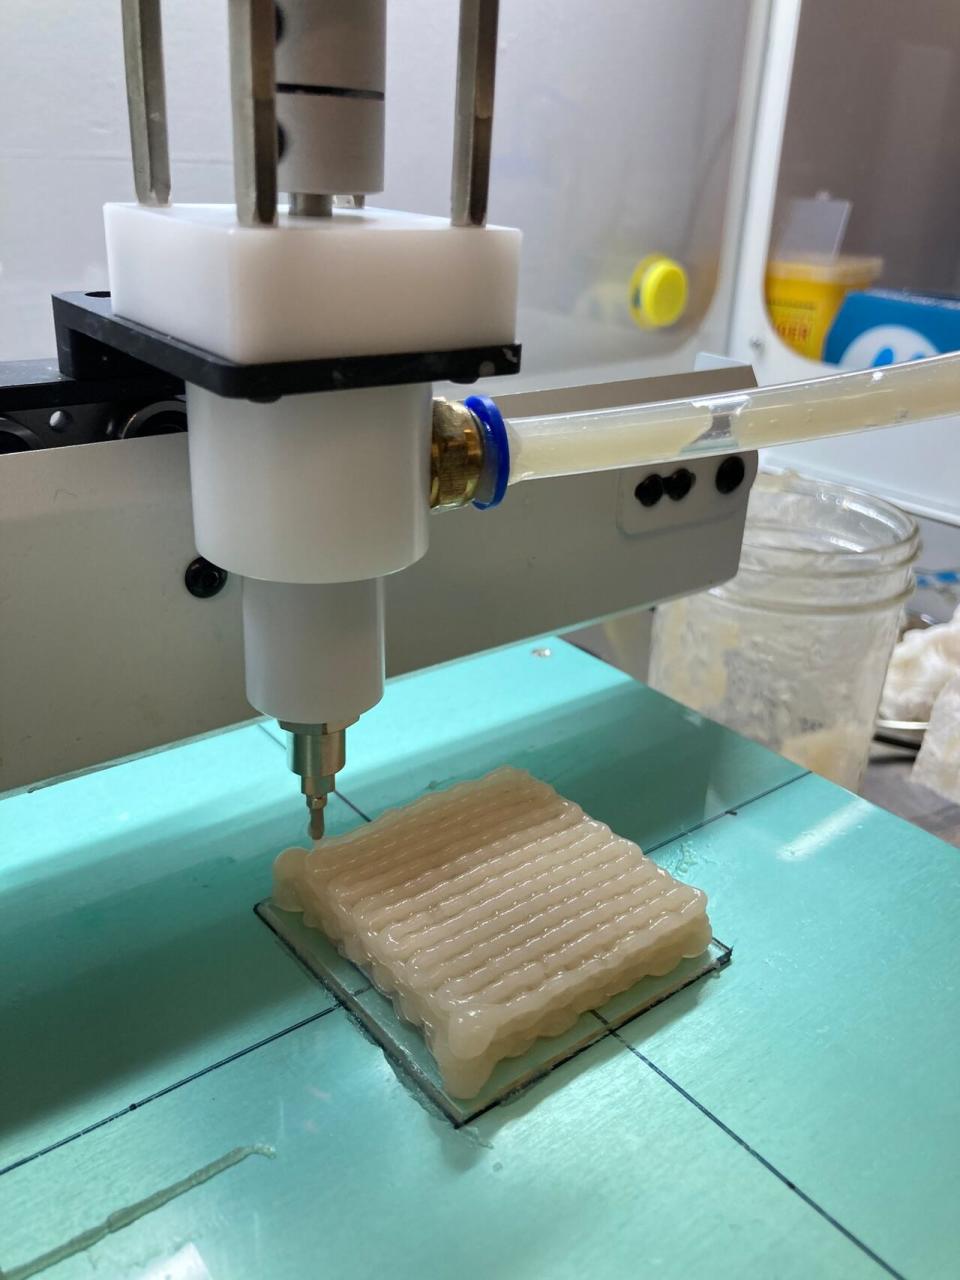 A three-dimensional (3D) printer at the University of BC creates layers of a hydrogel solution infused with reishi mushroom mycelium, a network of thin strands known as hyphae that are equivalent to the roots of fungi.